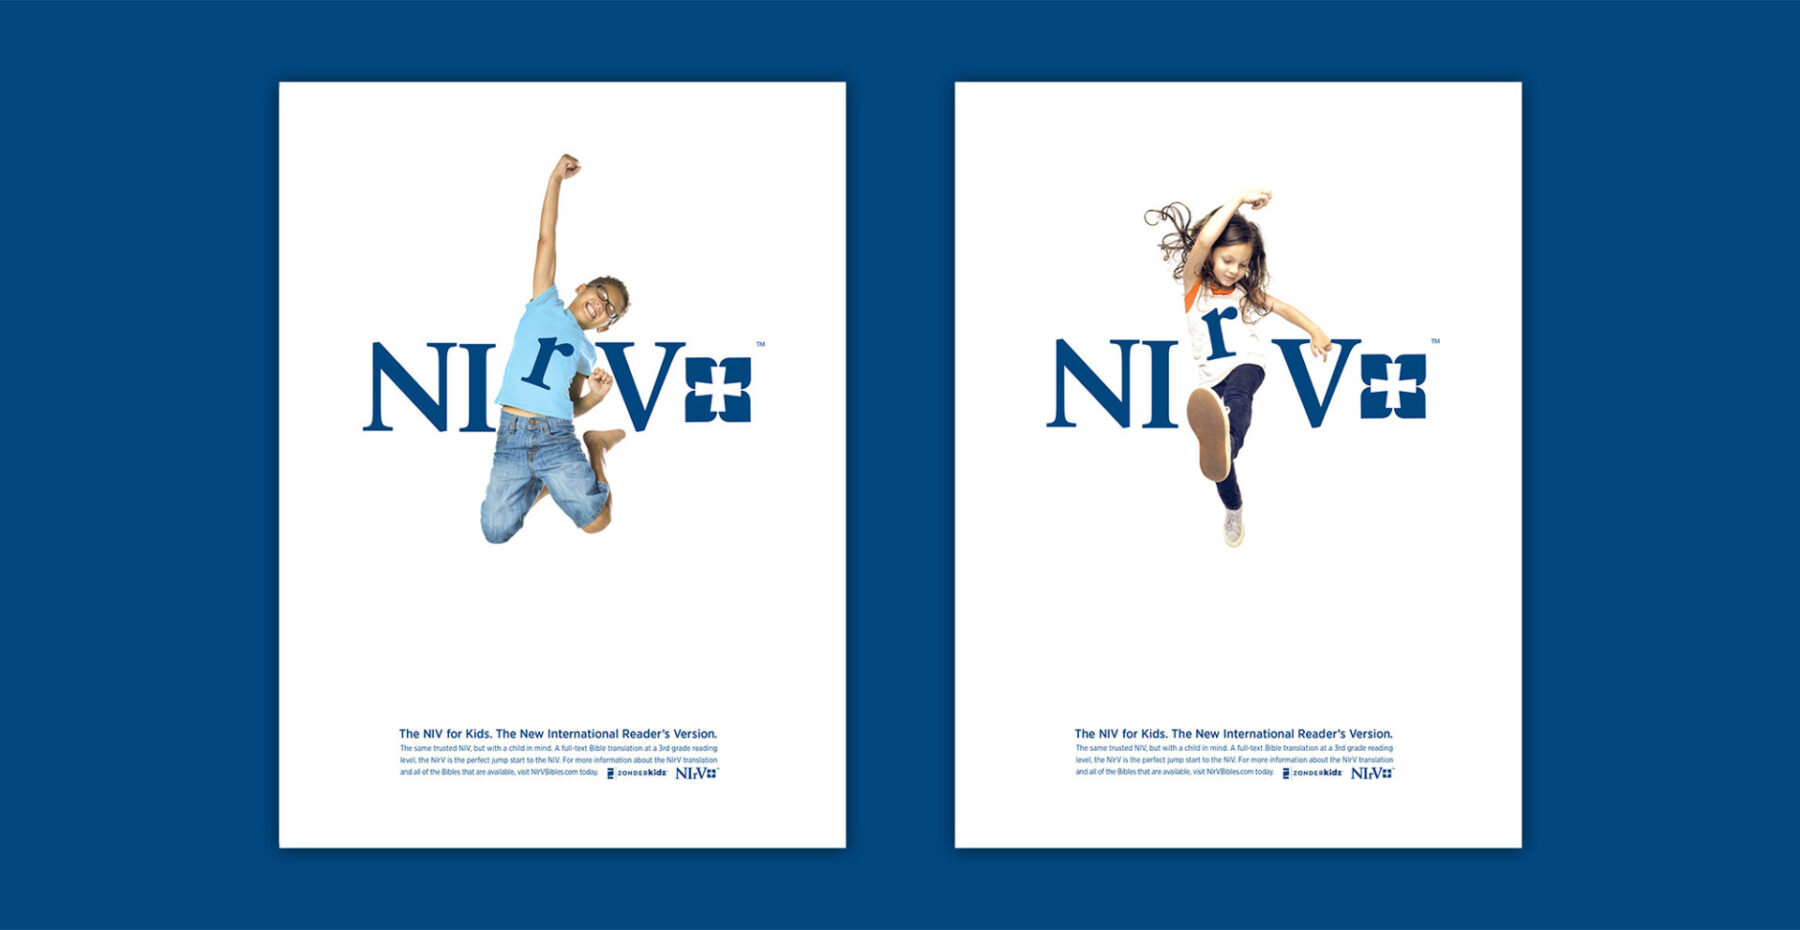 NIrV logo shown on print advertisements with kids jumping and lowercase "r" on their shirts